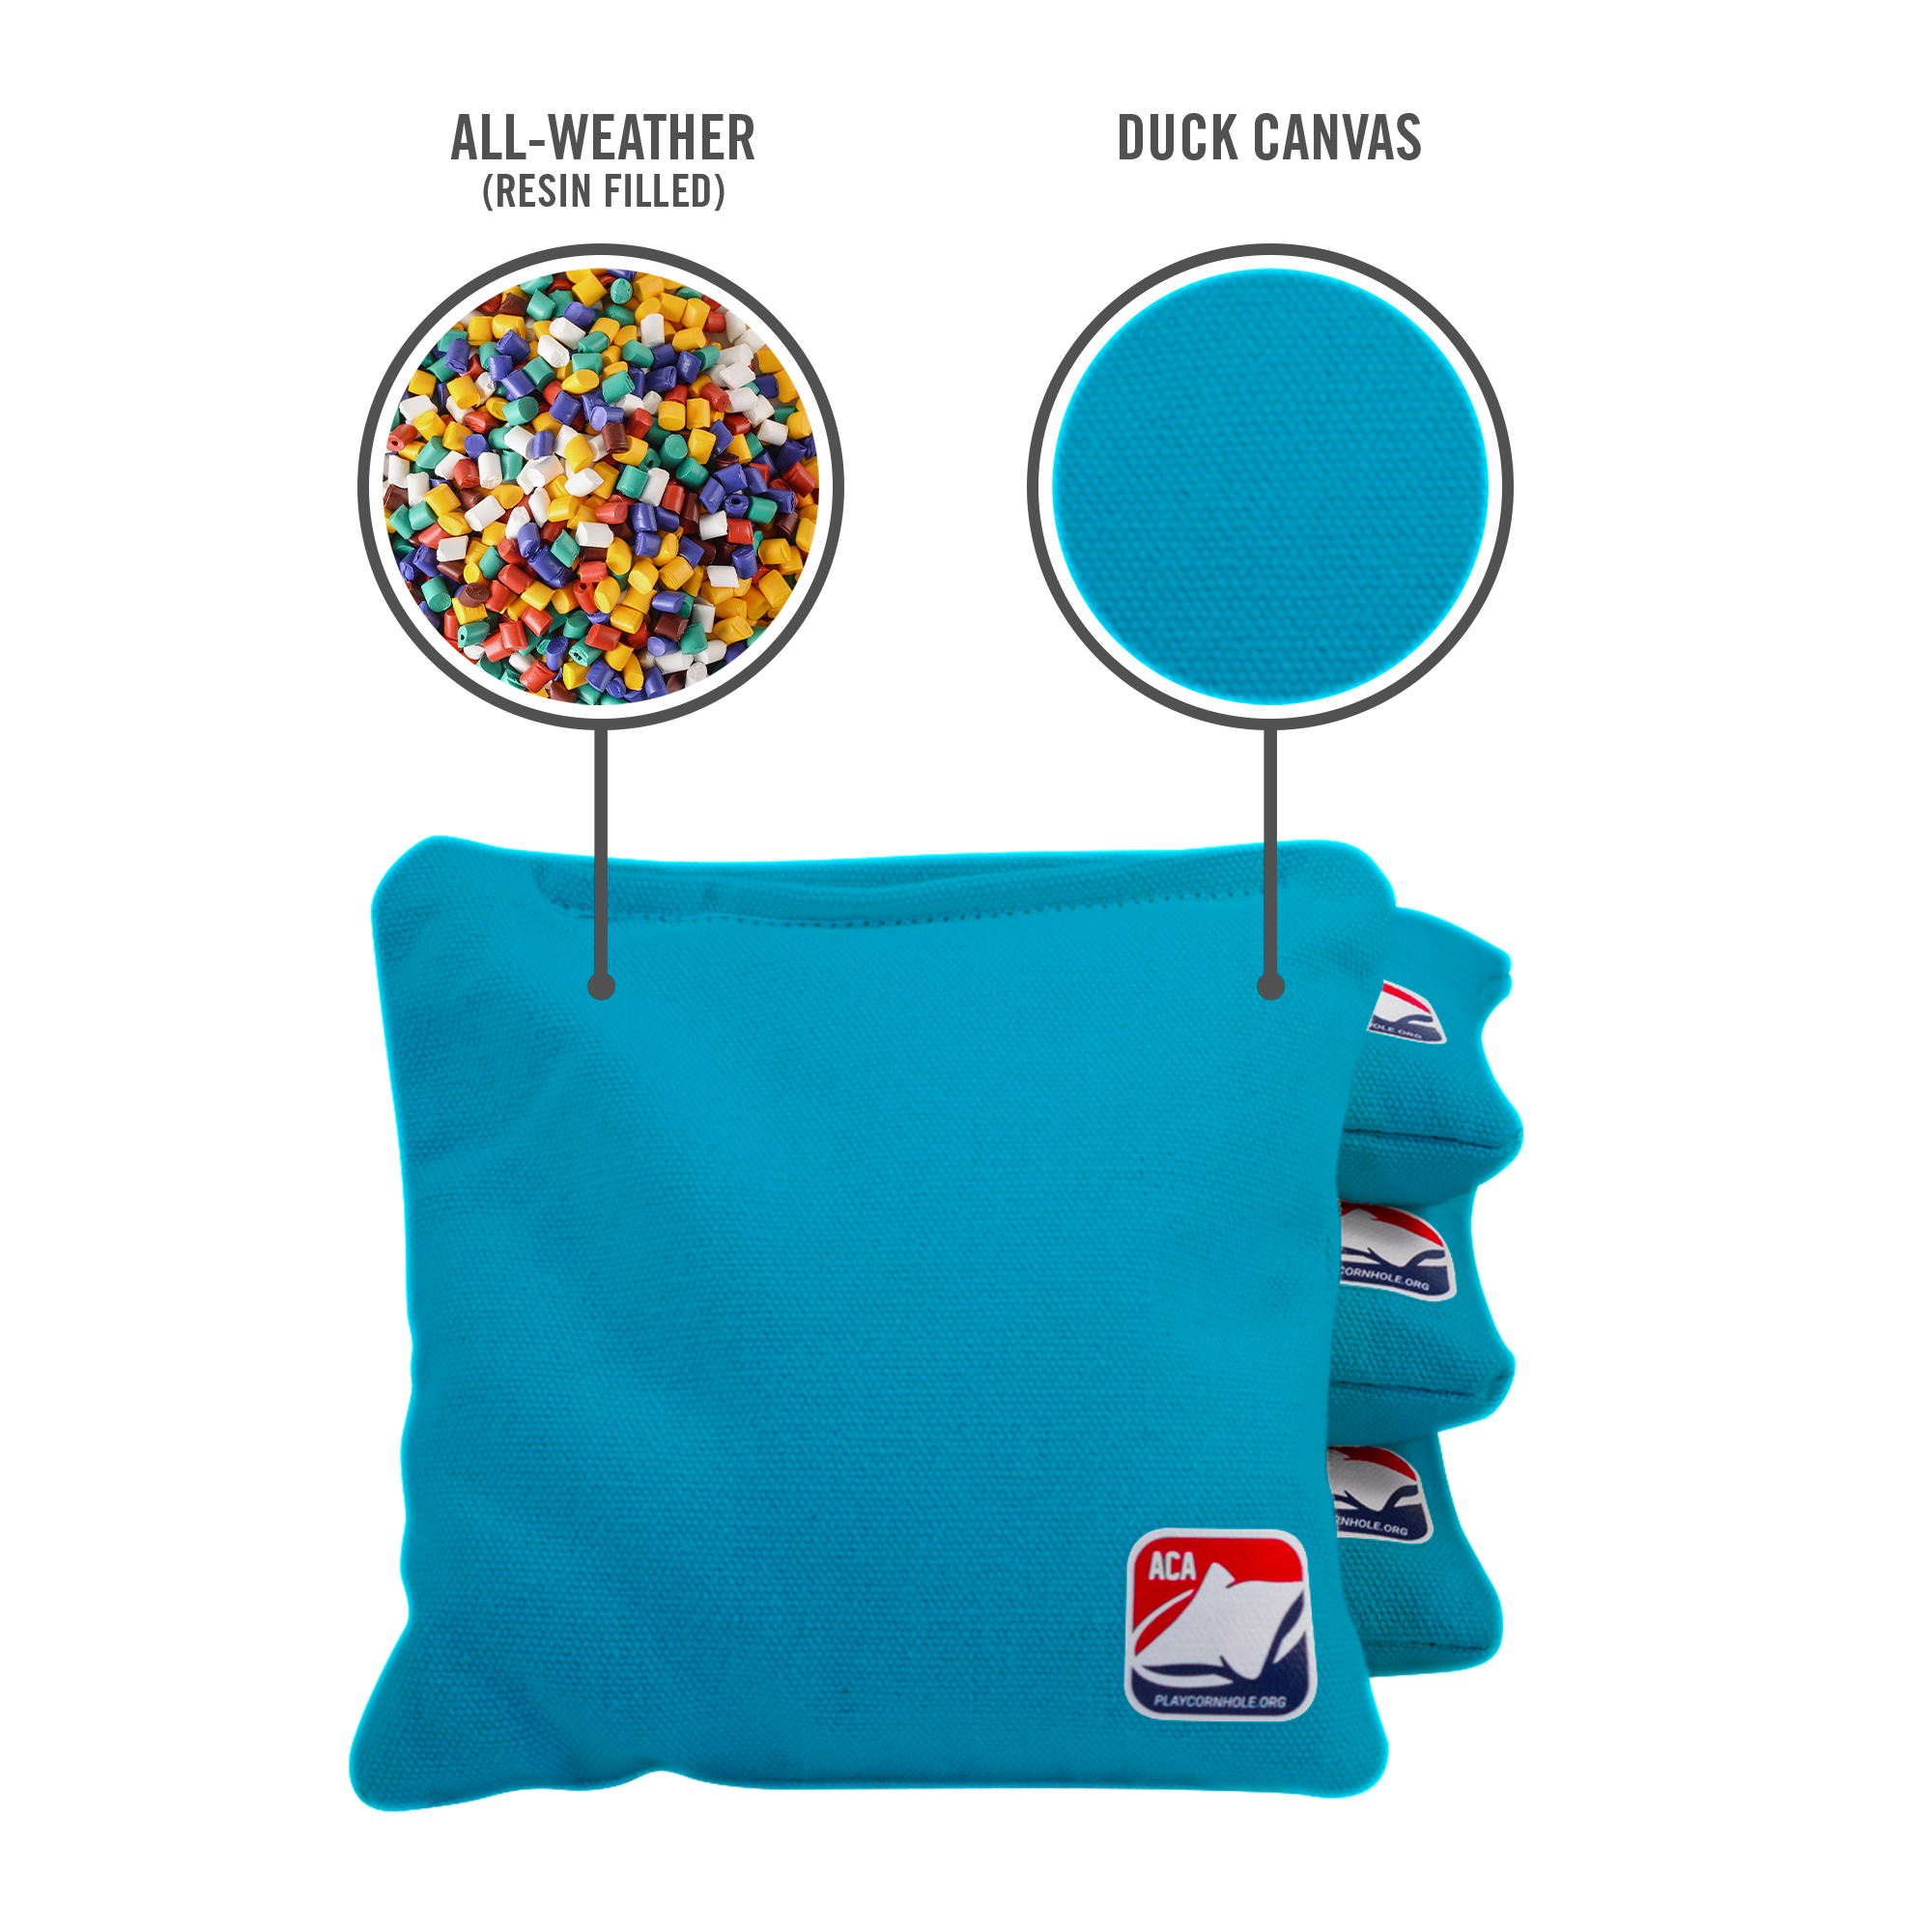 6-in Daily 66x Turquoise Competition Regulation Cornhole Bags